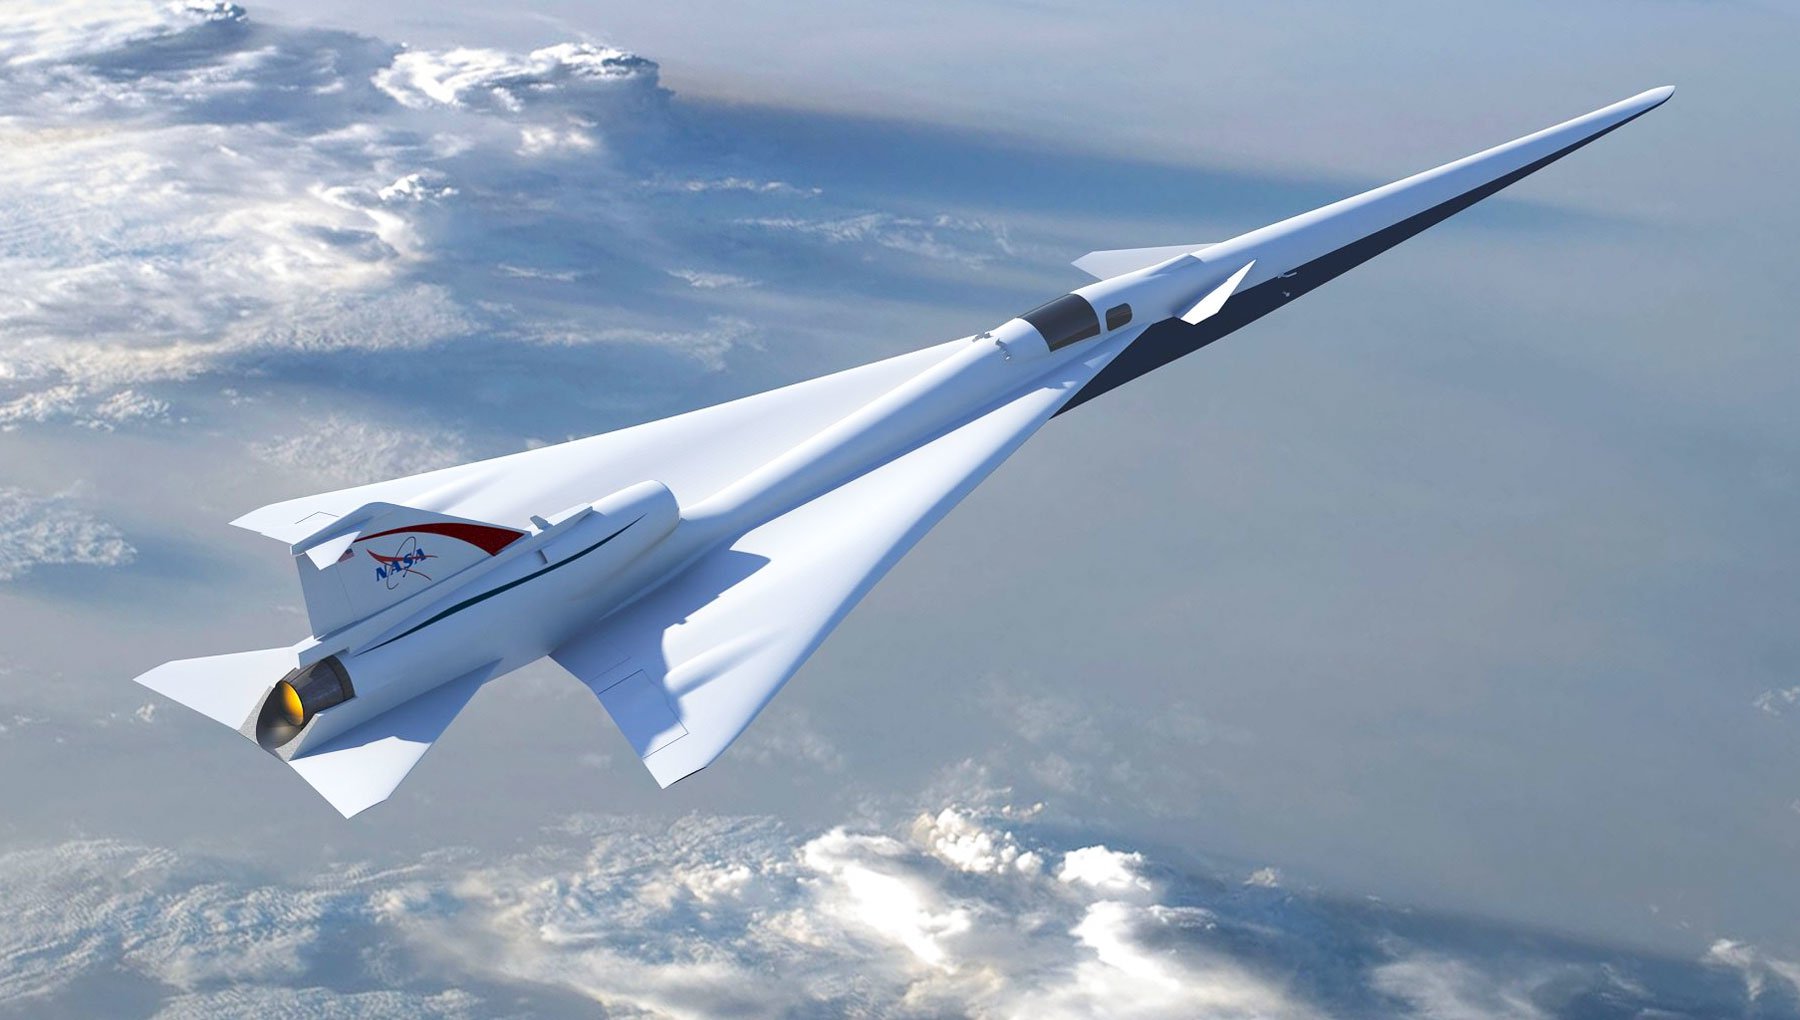 NASA hired Lockheed Martin to create a quiet supersonic aircraft